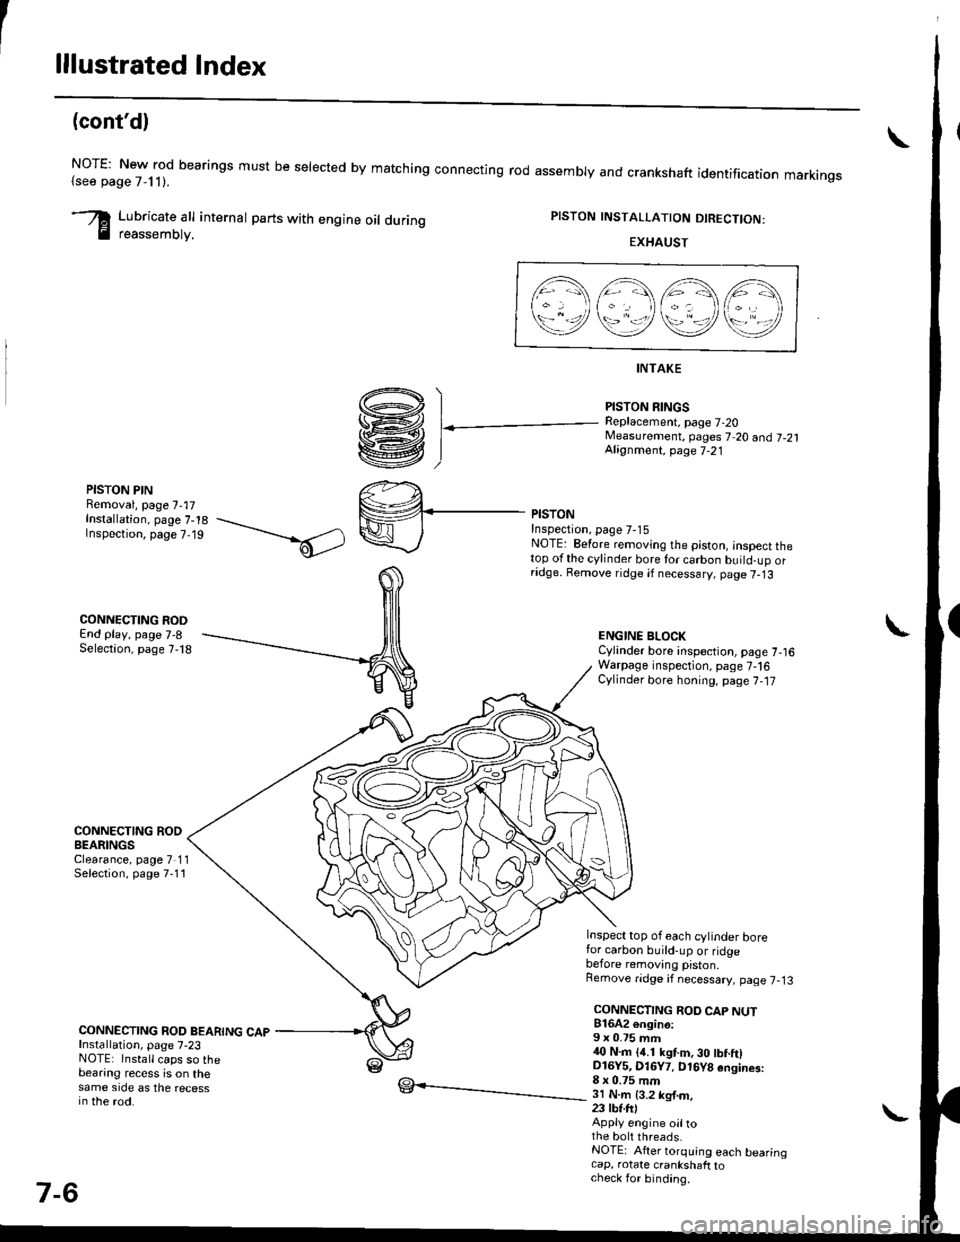 HONDA CIVIC 2000 6.G Repair Manual lllustrated Index
(contd)
NOTE: New rod bearings must be selected by matching connecting rod assembly and crankshaft(see page 7,11).identification markings
Lubricate all internal parts with engine oi